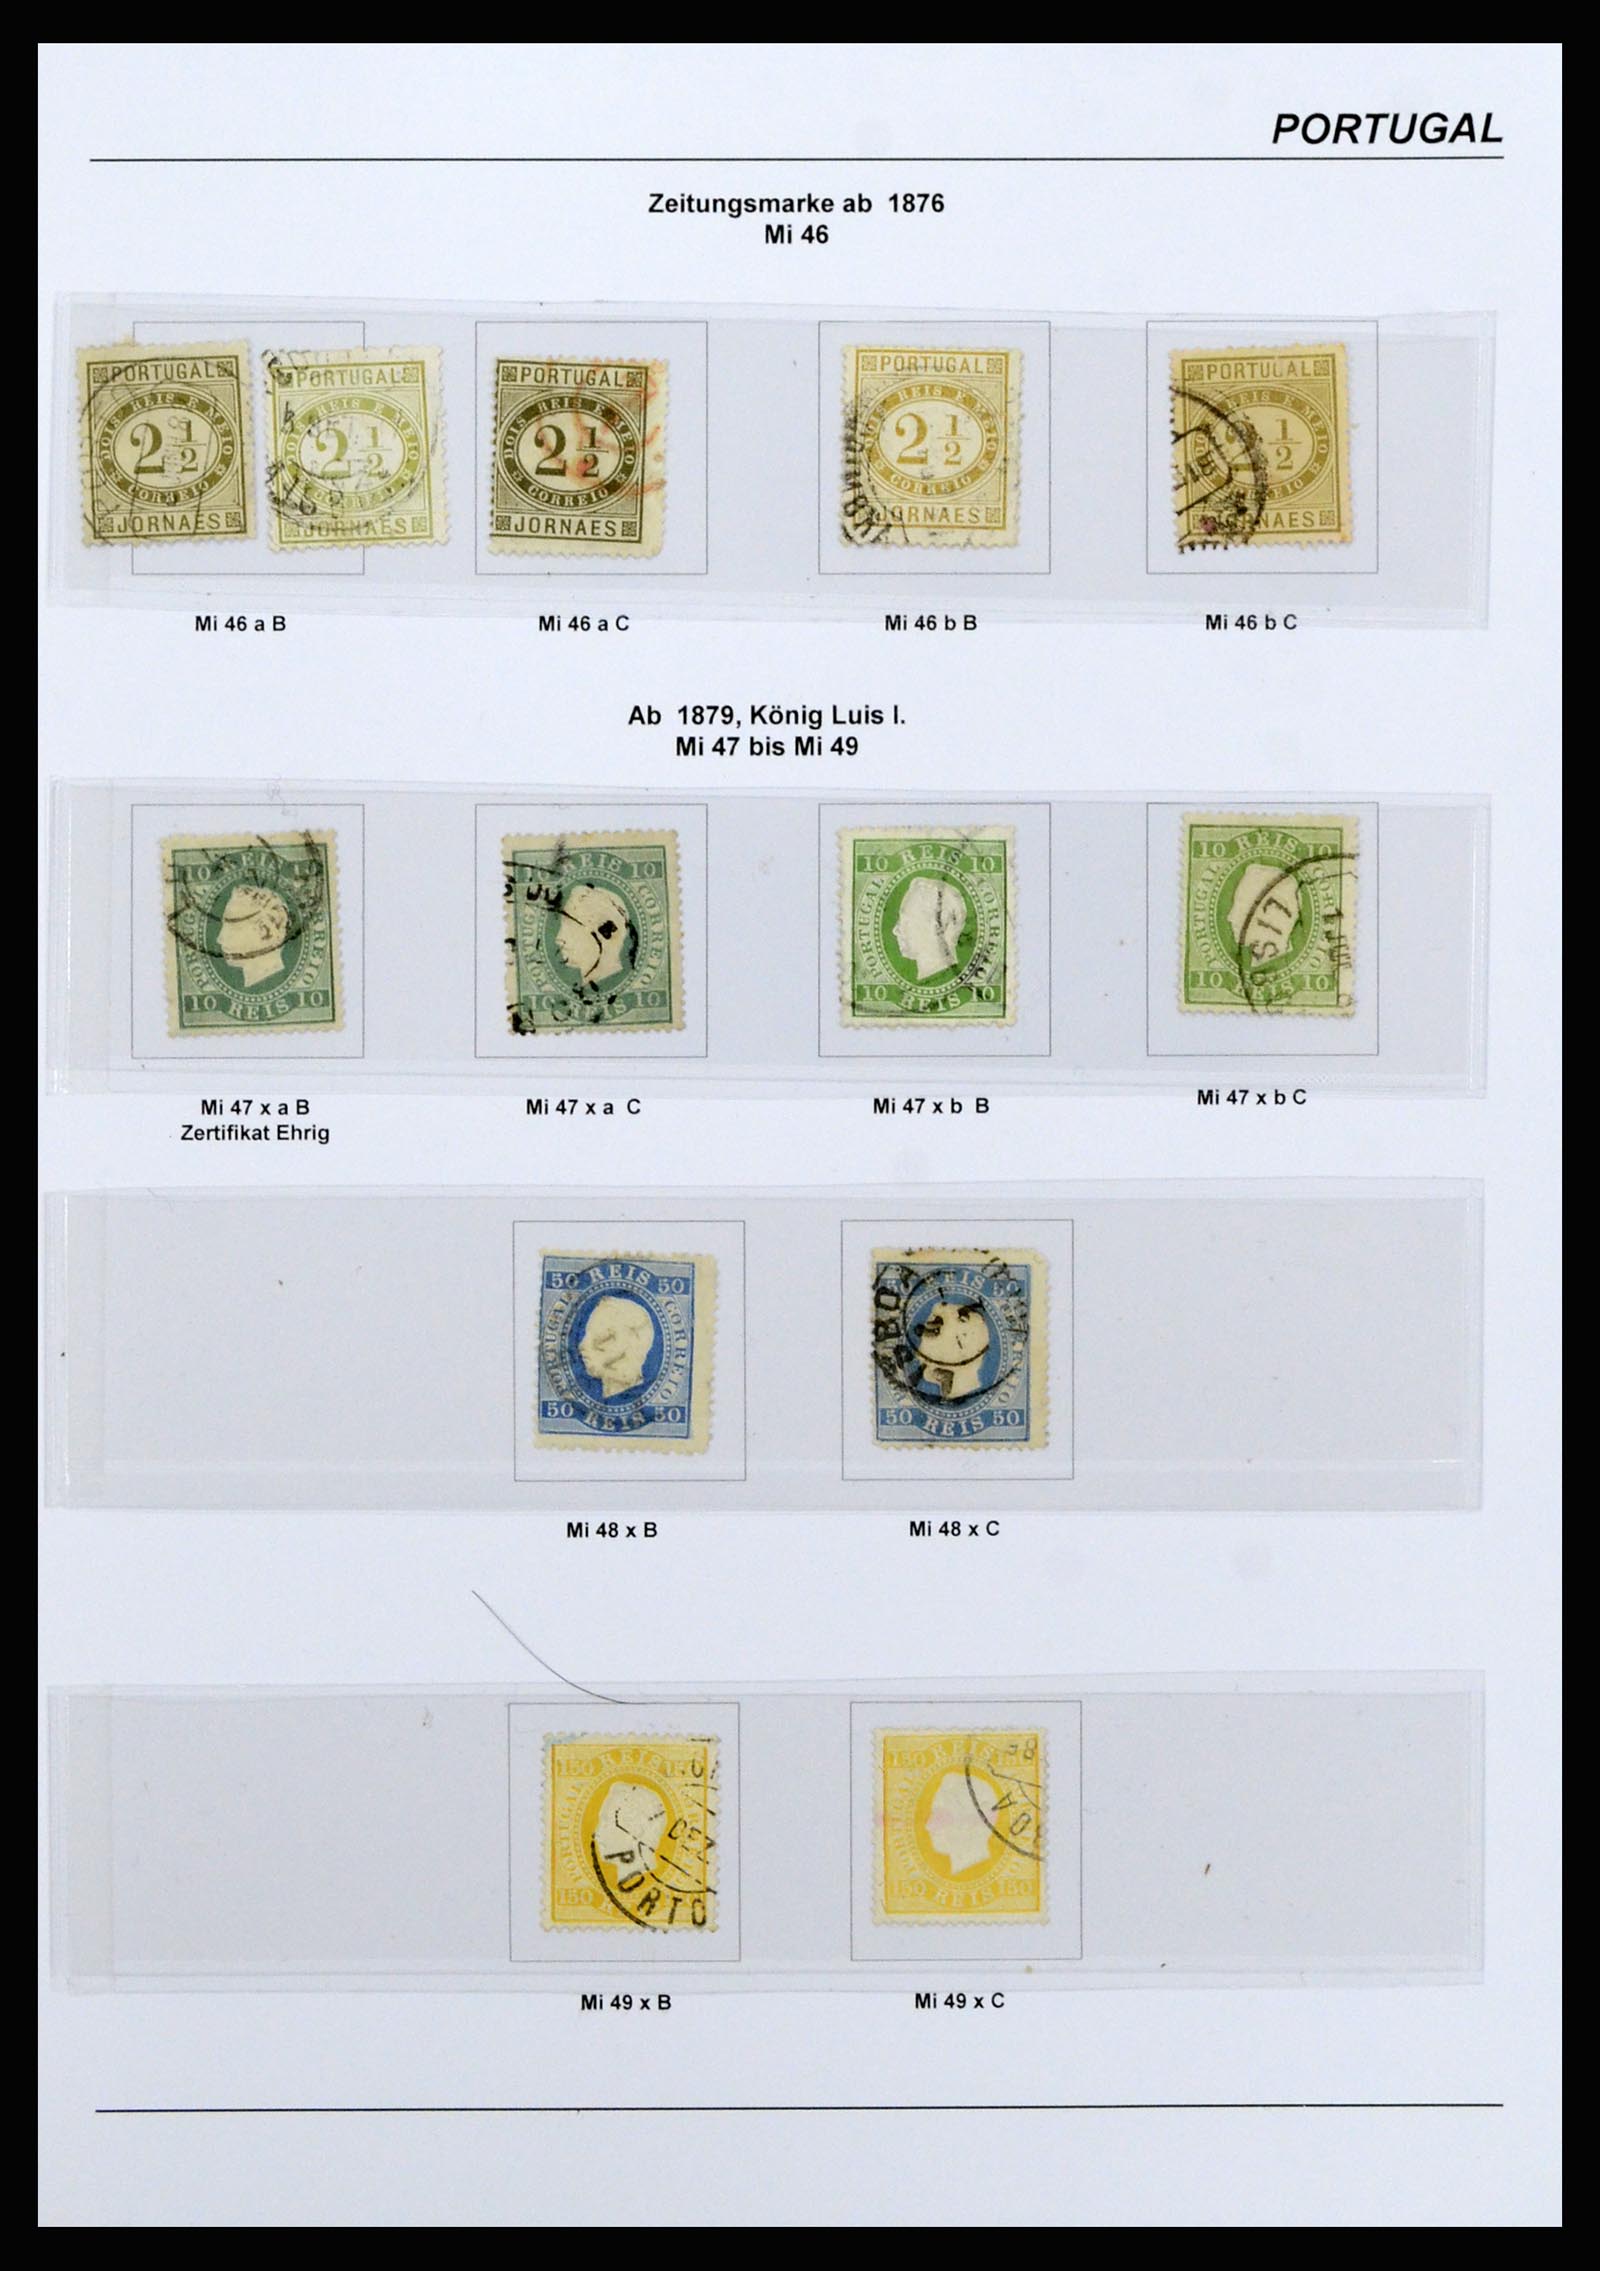 37133 037 - Stamp collection 37133 Portugal 1853-1893.